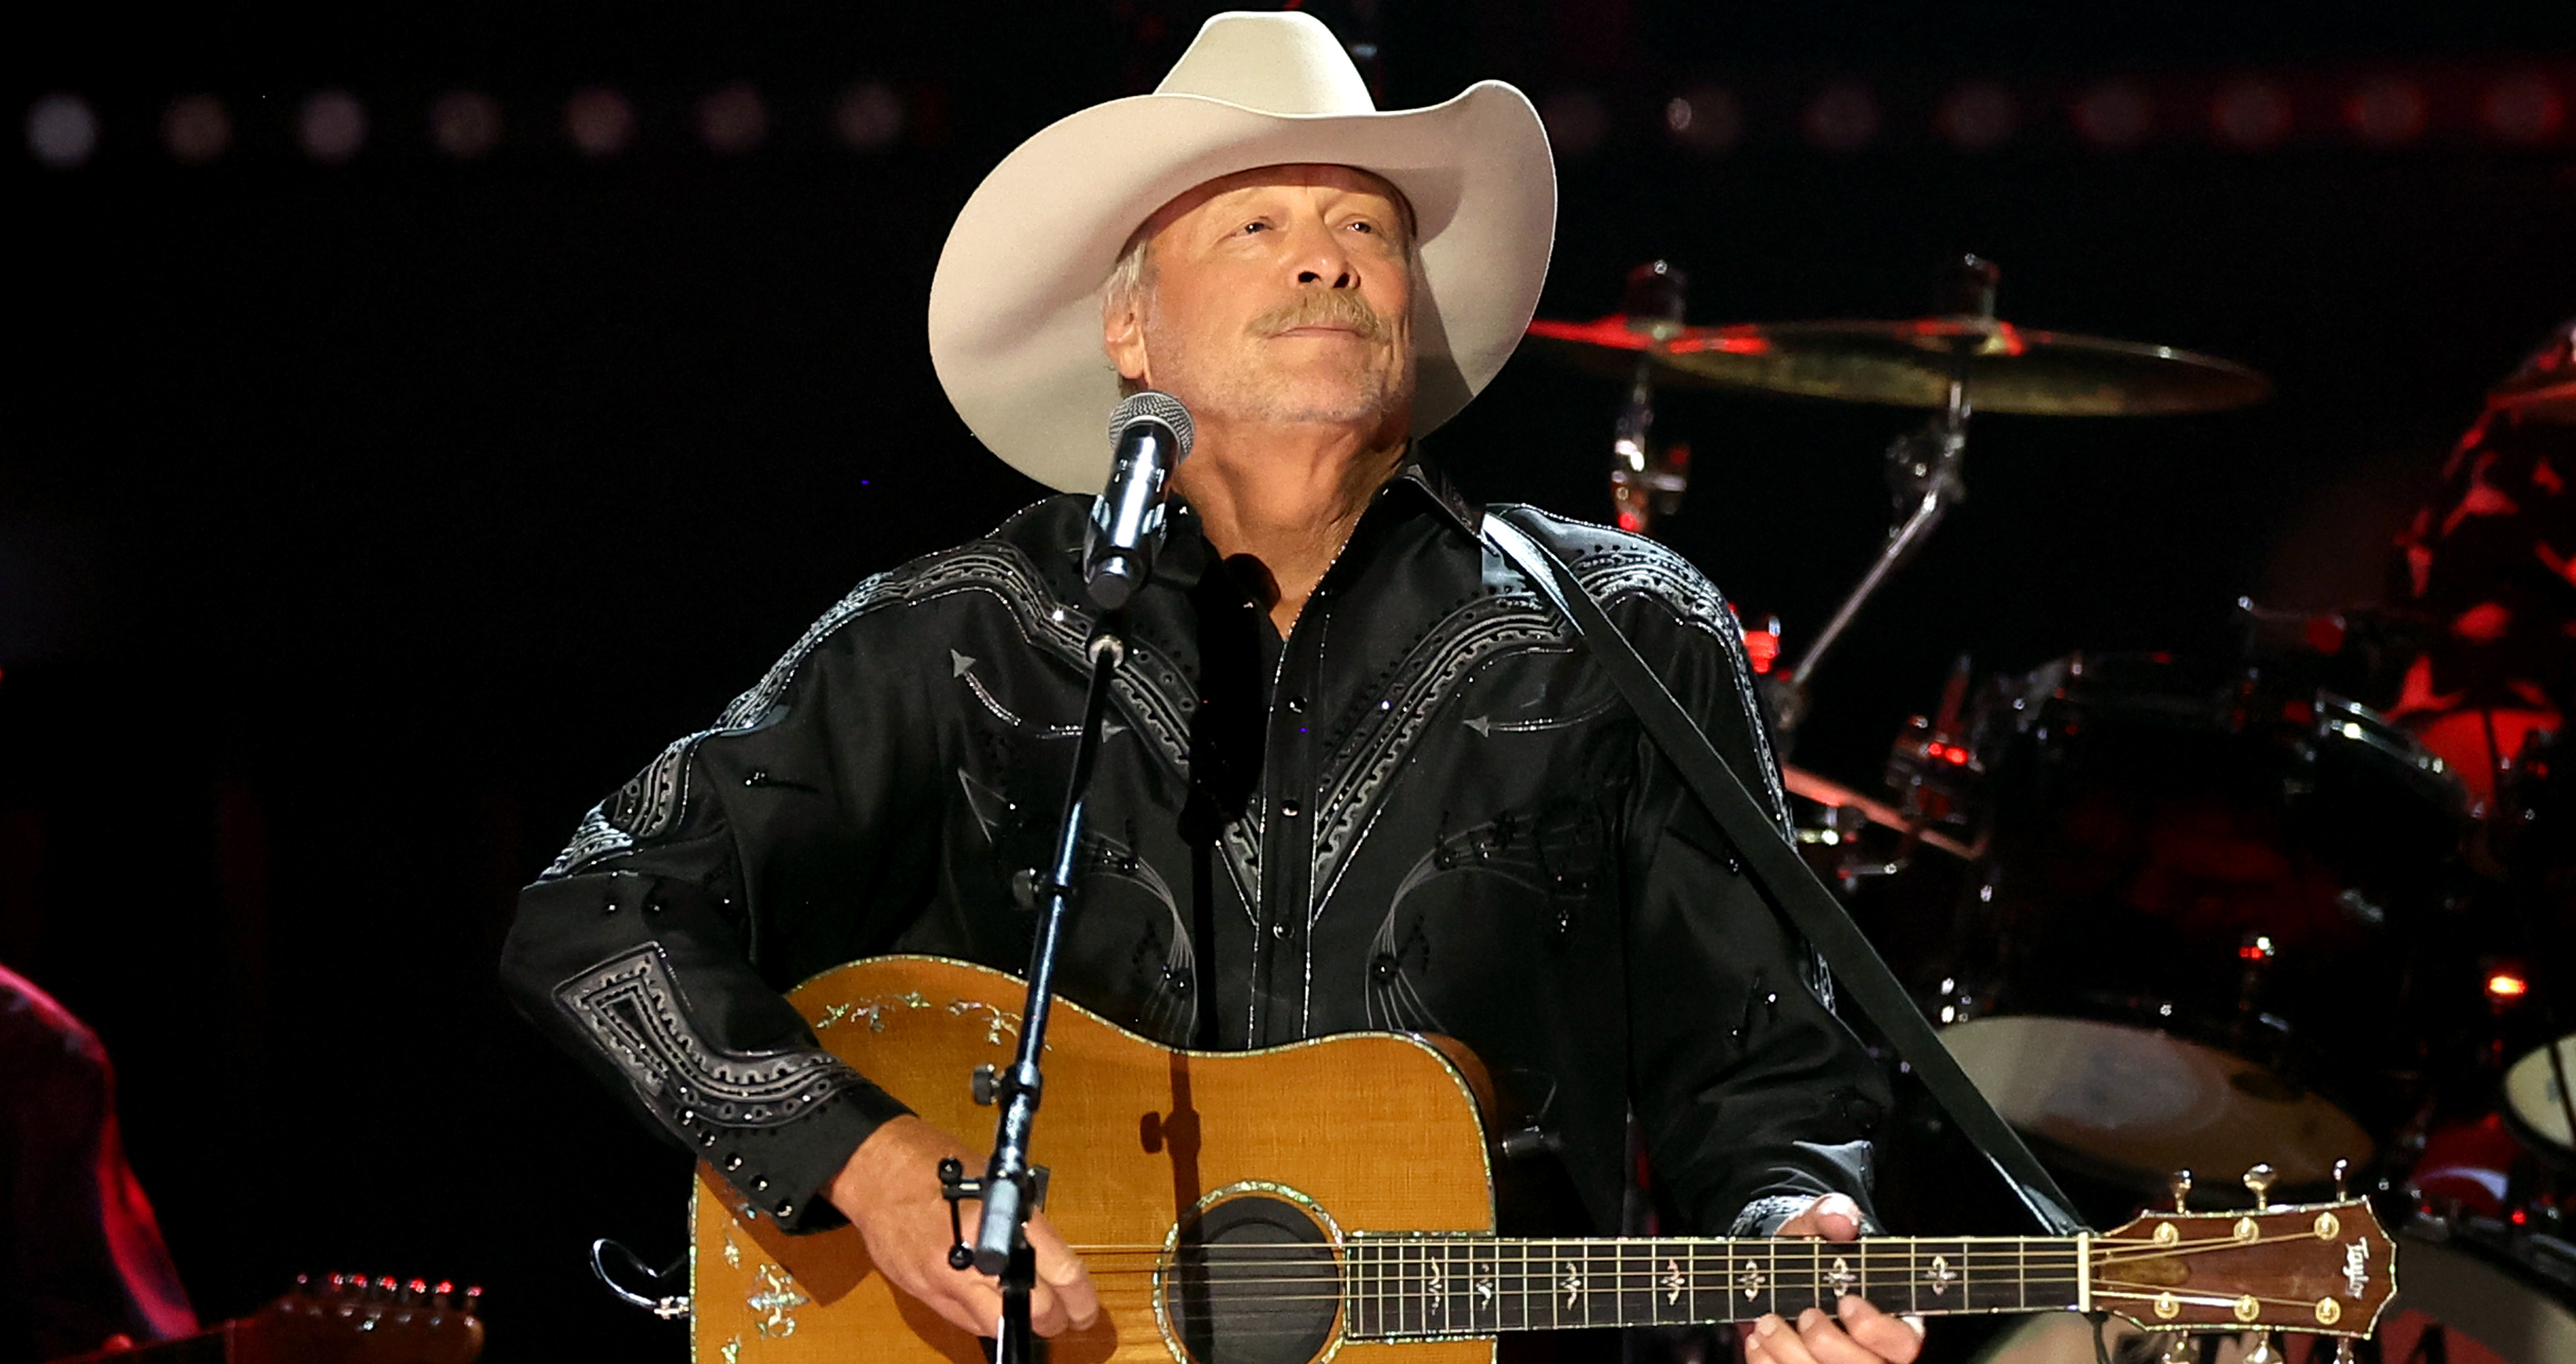 Alan Jackson announces his farewell tour after more than a decade of performing with Charcot-Marie-Tooth disease. Here's what to know about the neurological condition.